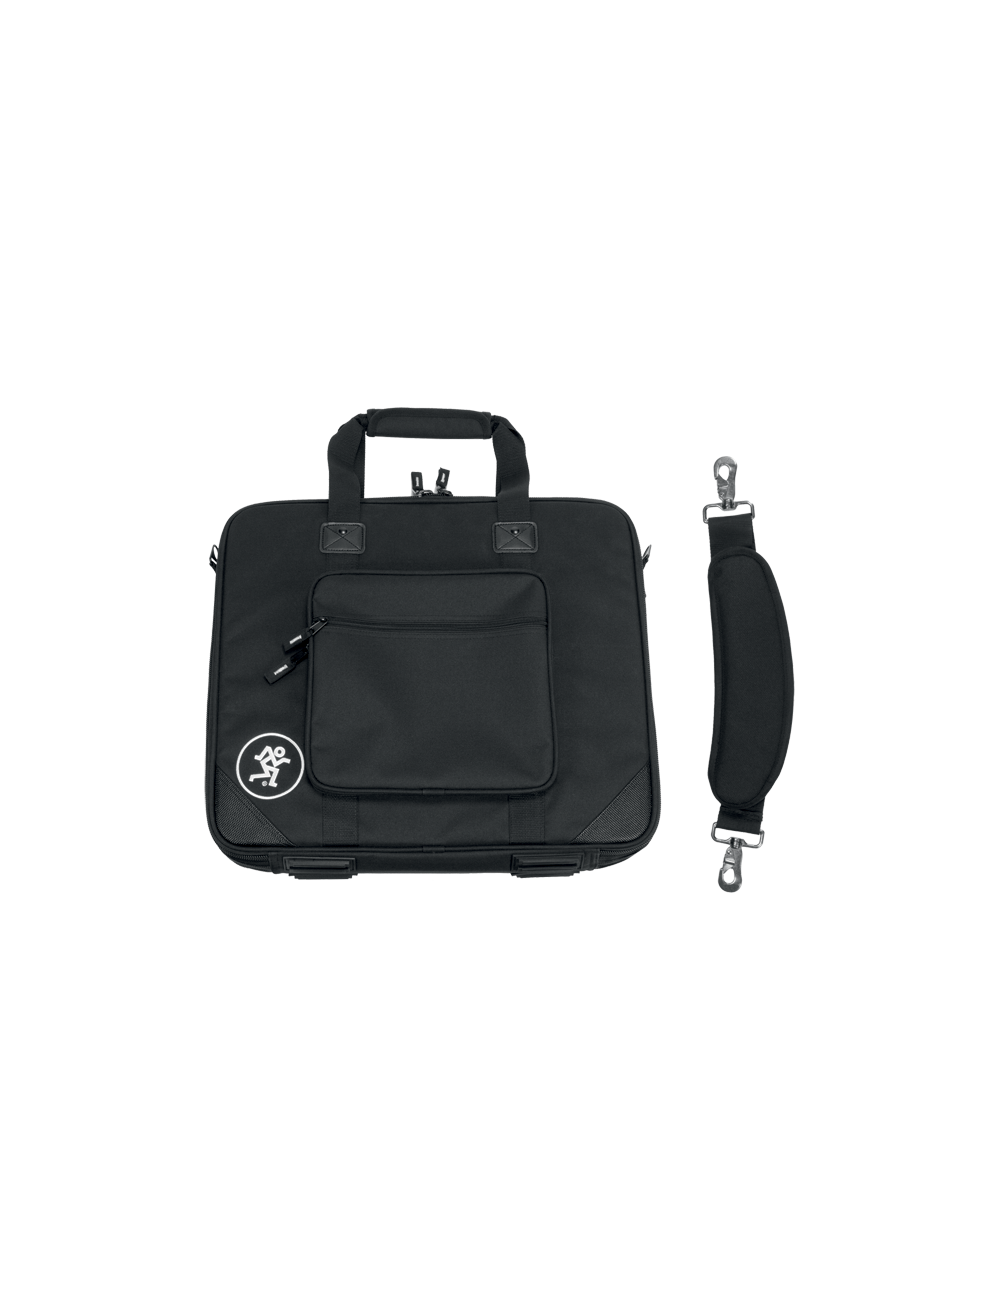 Carrying case for ProFX16